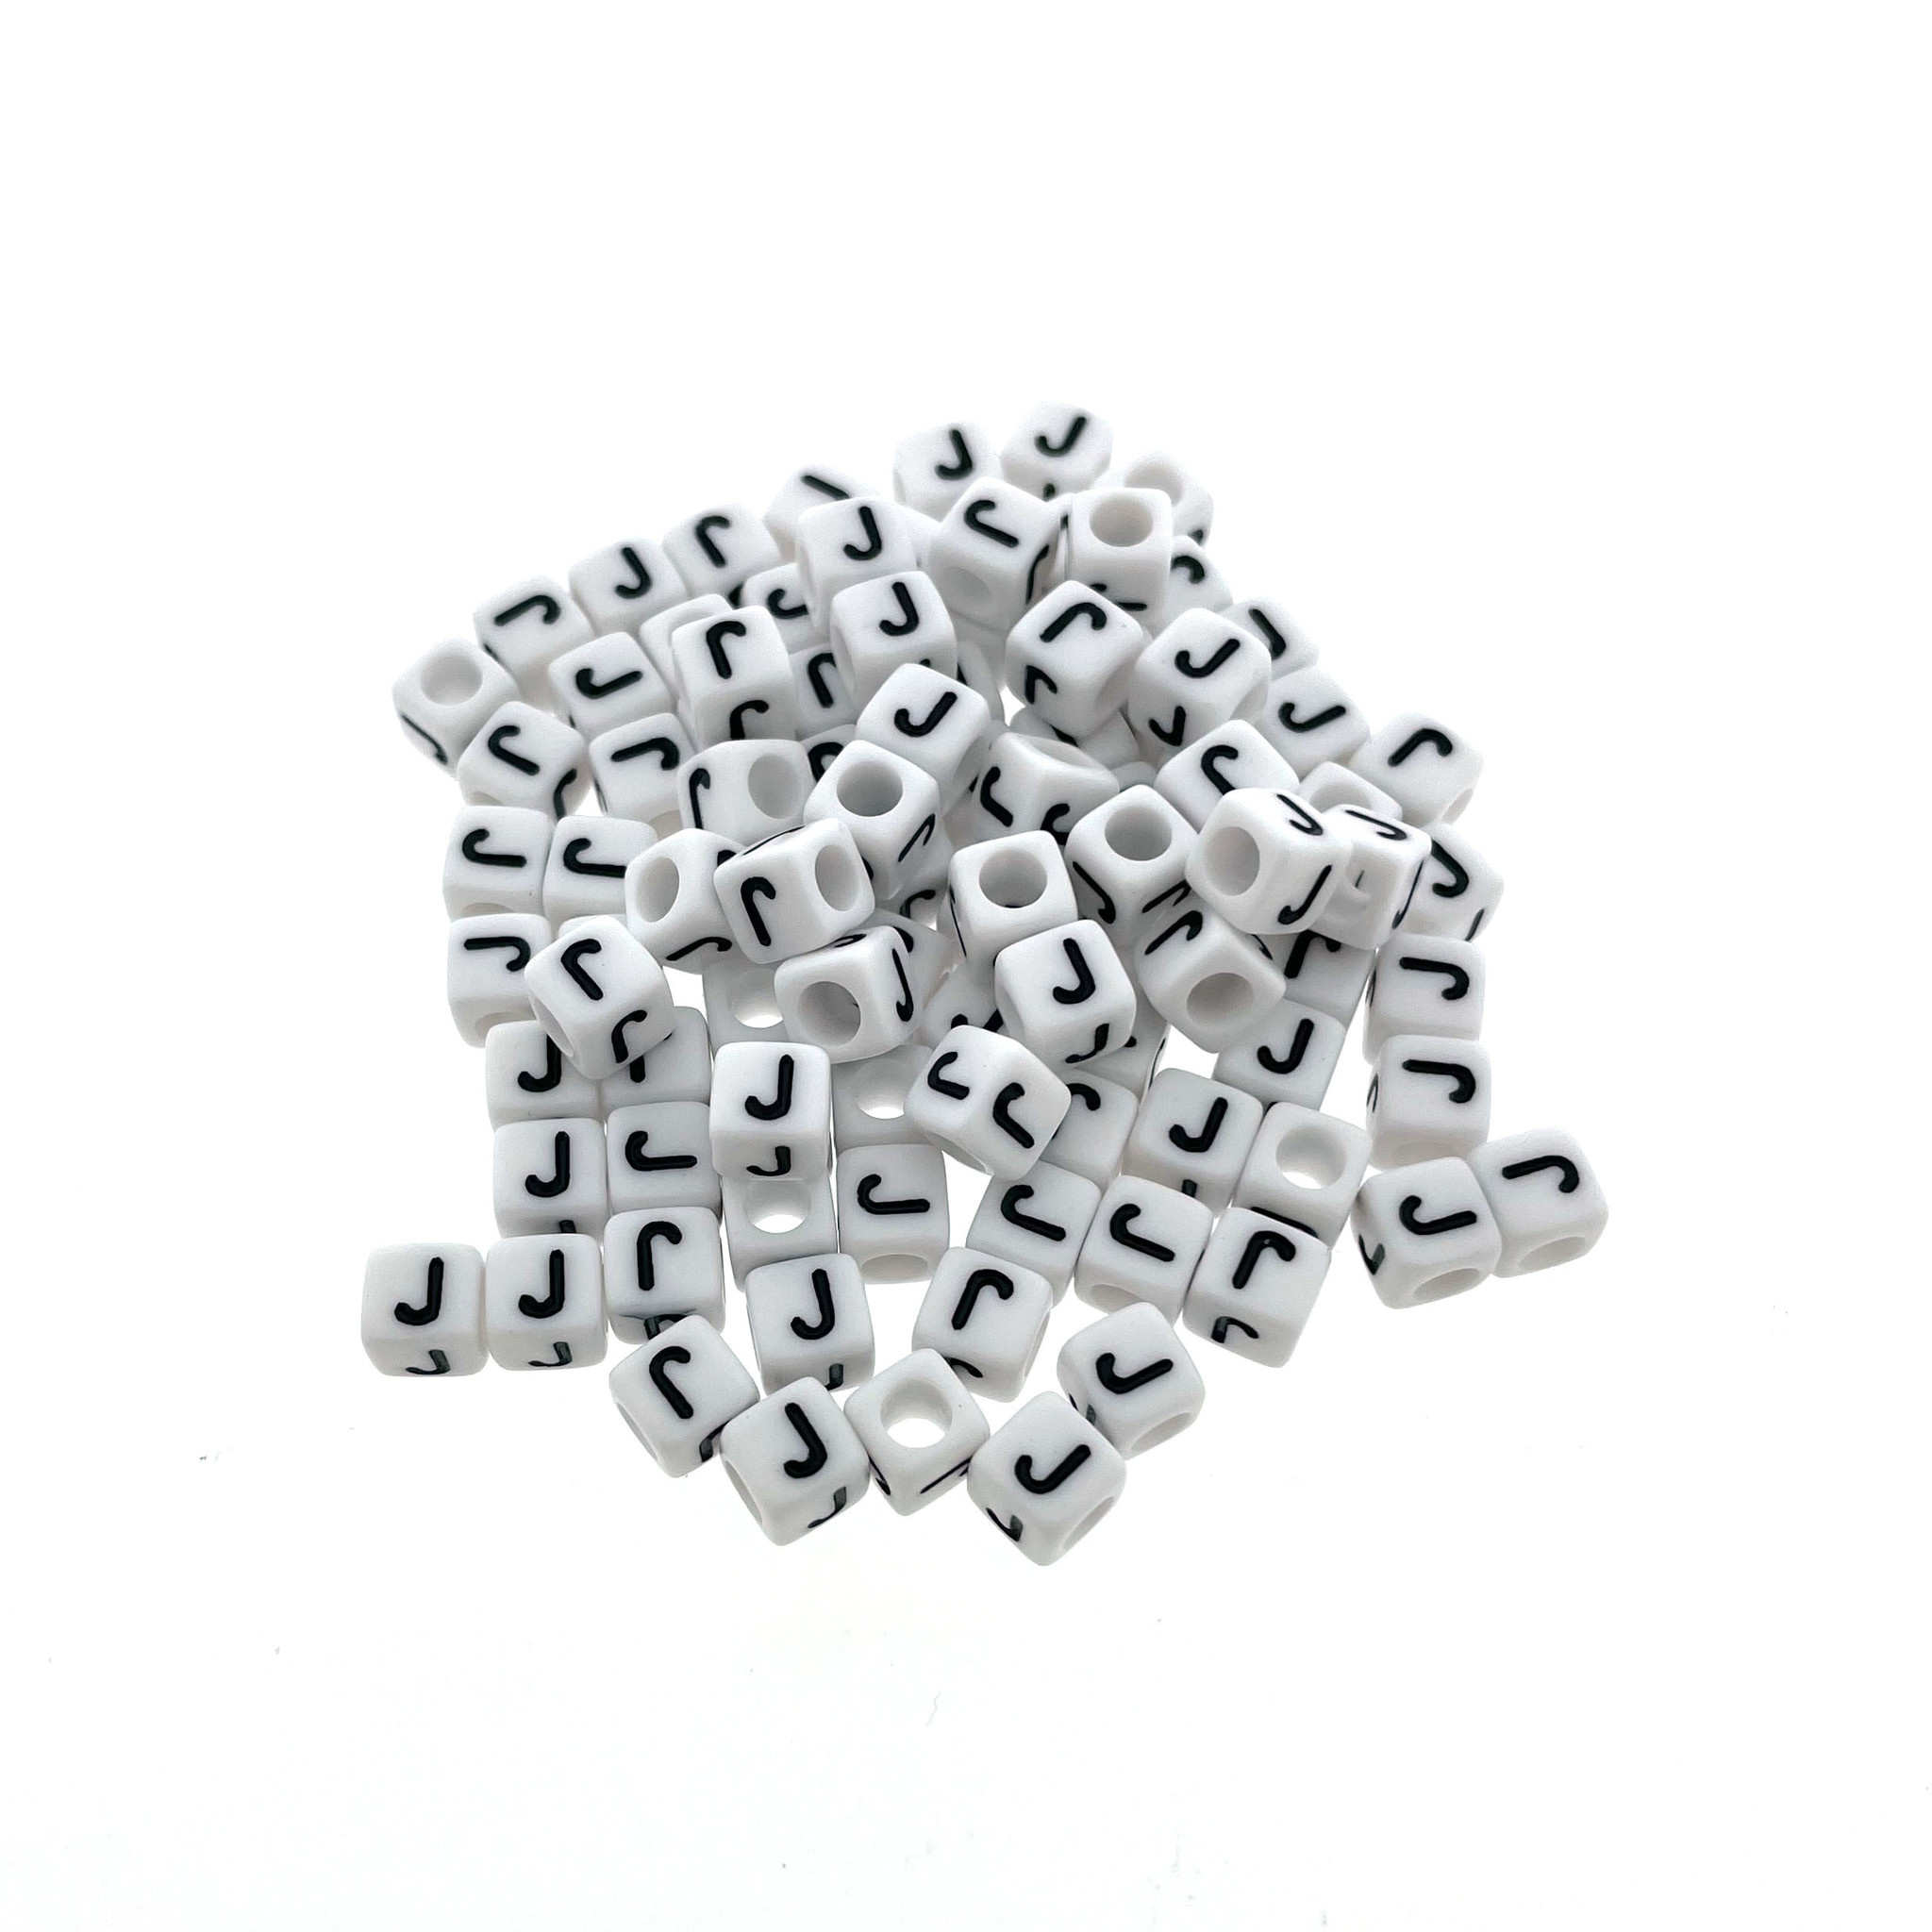 Buy Paracord alphabet letter beads White G at 123Paracord - 123Paracord